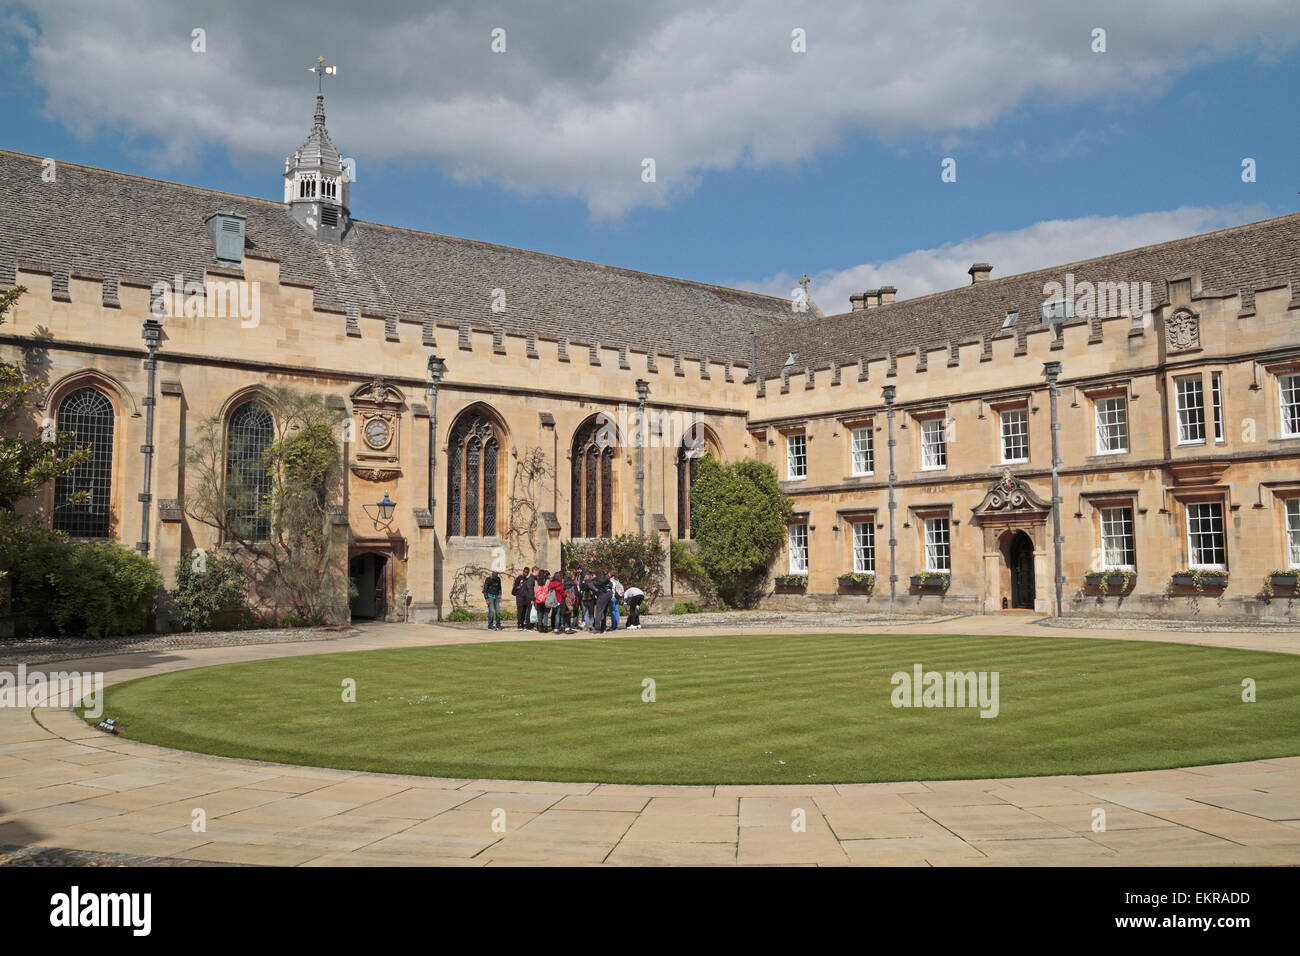 Tourists in the Front Quad (quadrangle) in St John's College, University of Oxford, Oxford, Oxfordshire, UK. Stock Photo